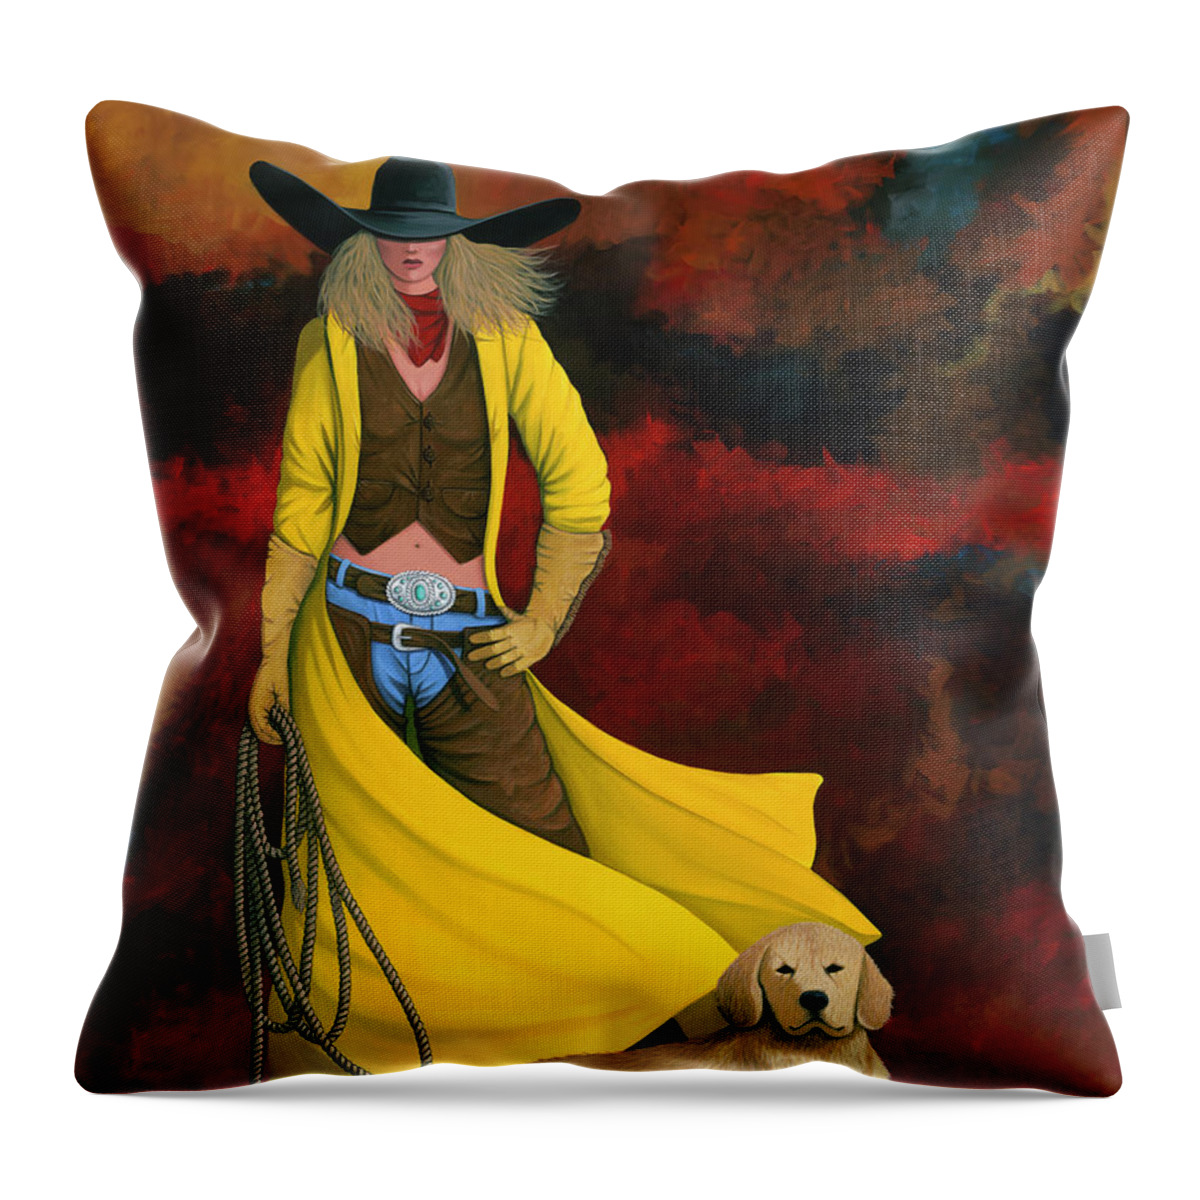 Cowgirl Girl And Dog Throw Pillow featuring the painting Man's Best Friend by Lance Headlee